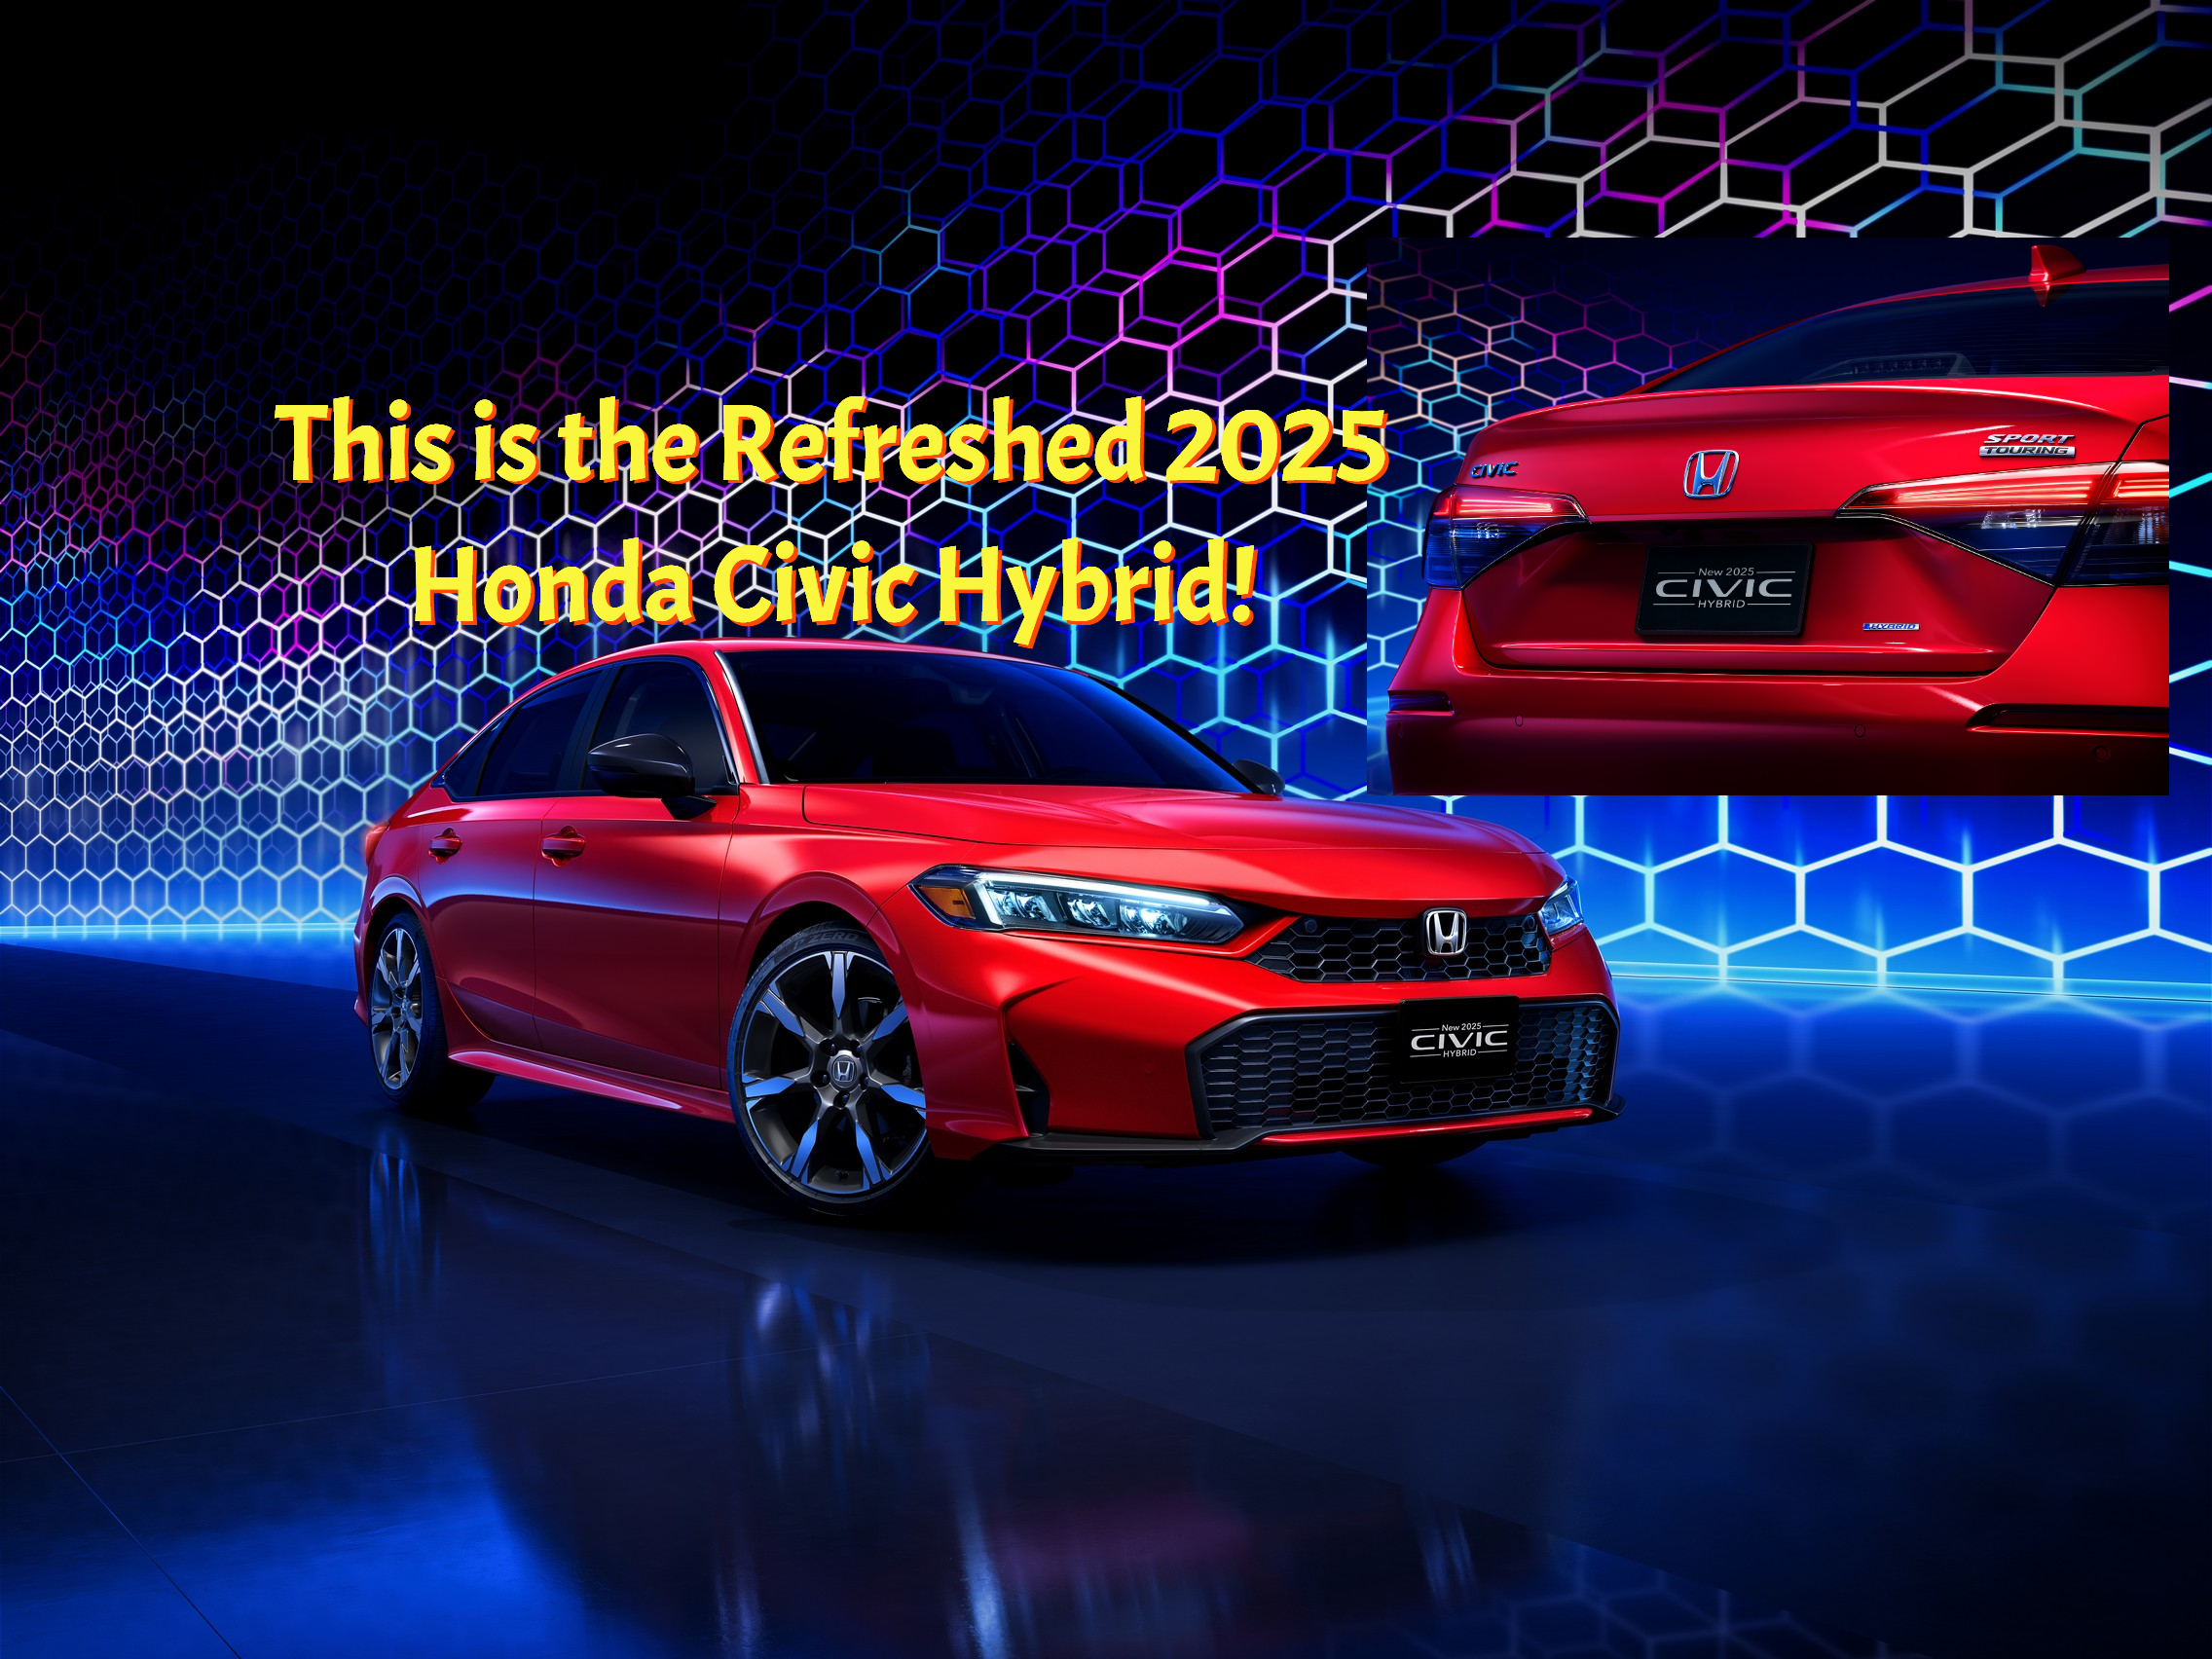 Here Is Our First Look at the Refreshed 2025 Honda Civic Hybrid